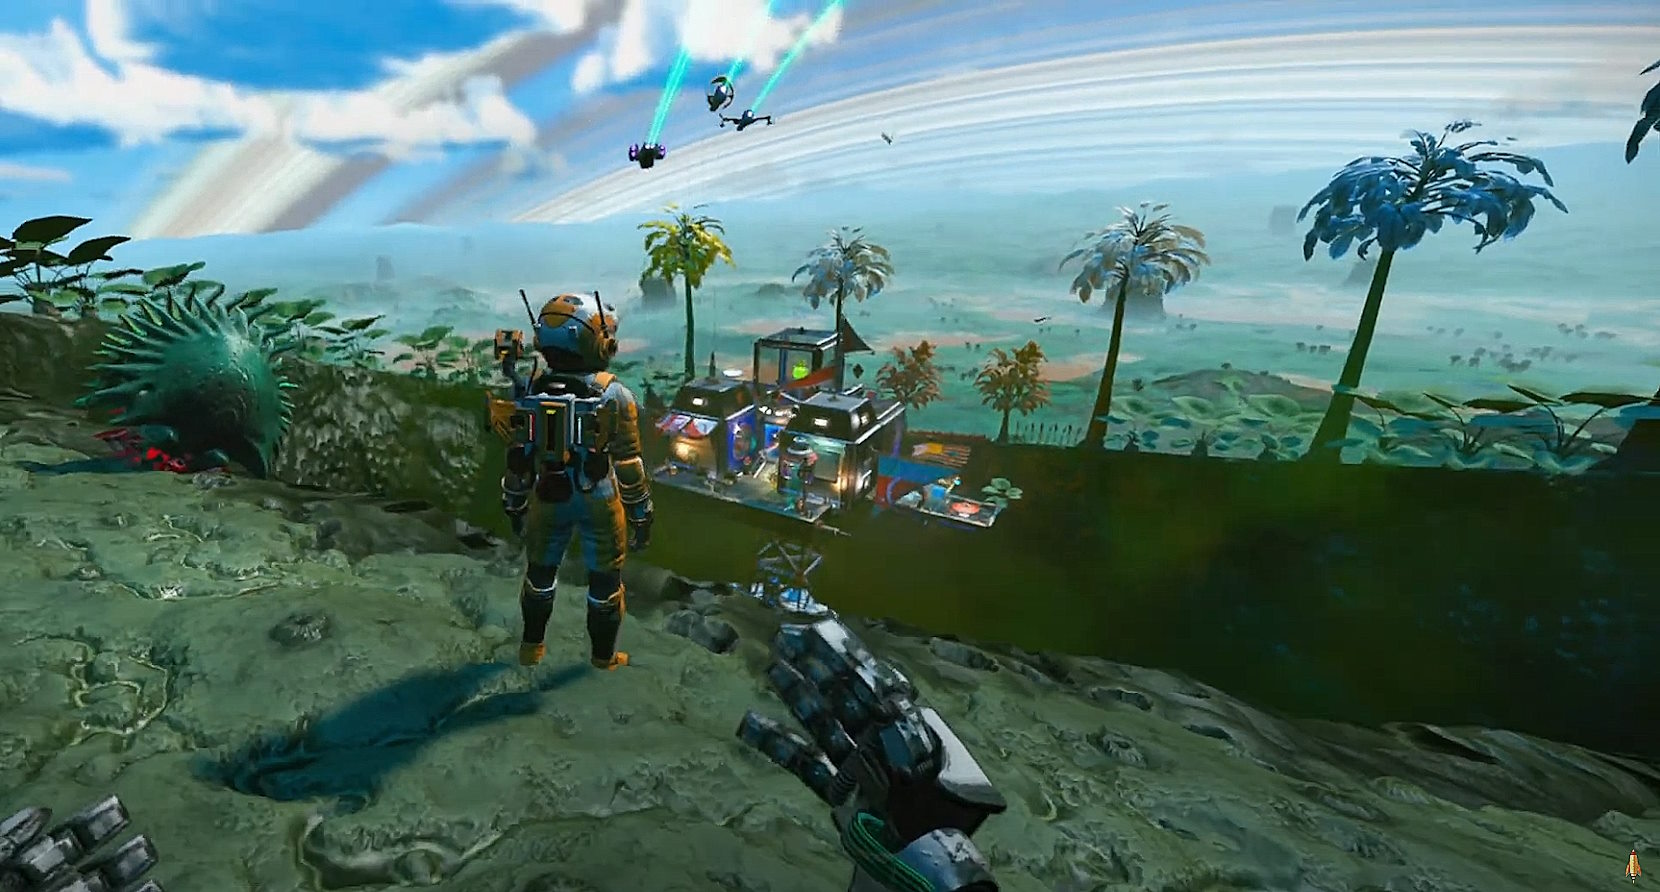 Scene from NMS Wonders ep 25 show